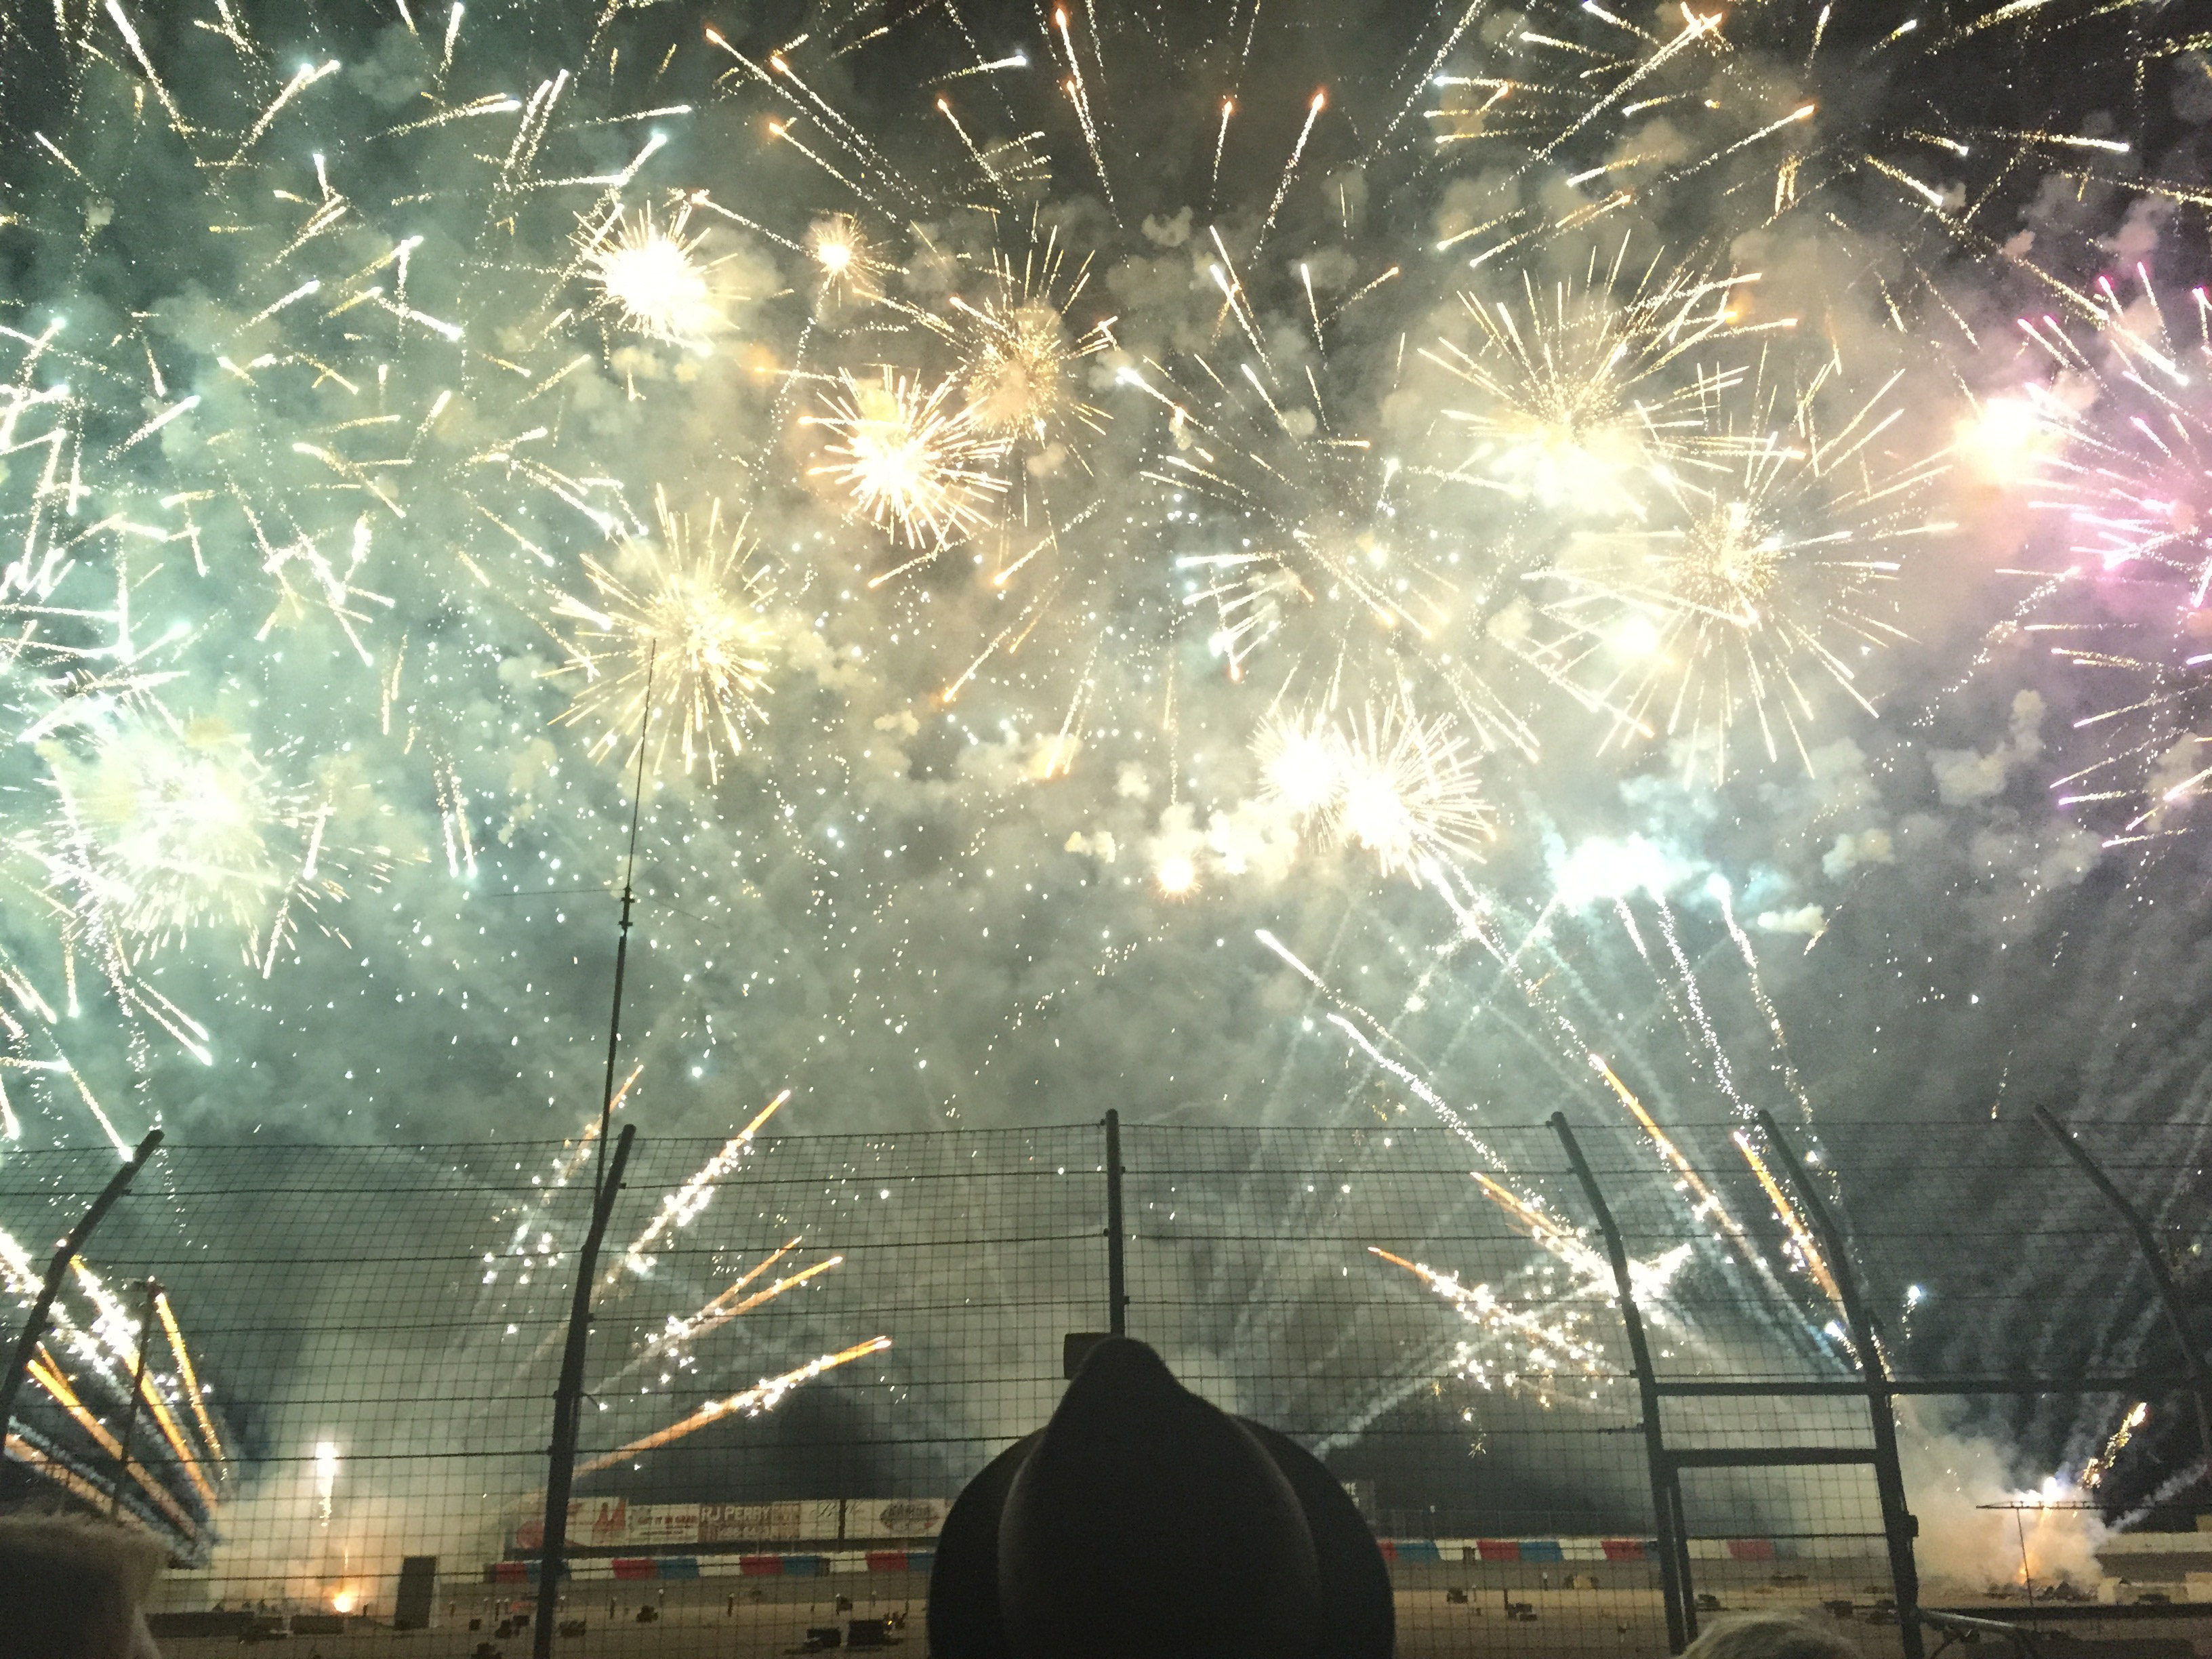 Western Pyrotechnic Association: Learn to hack fireworks